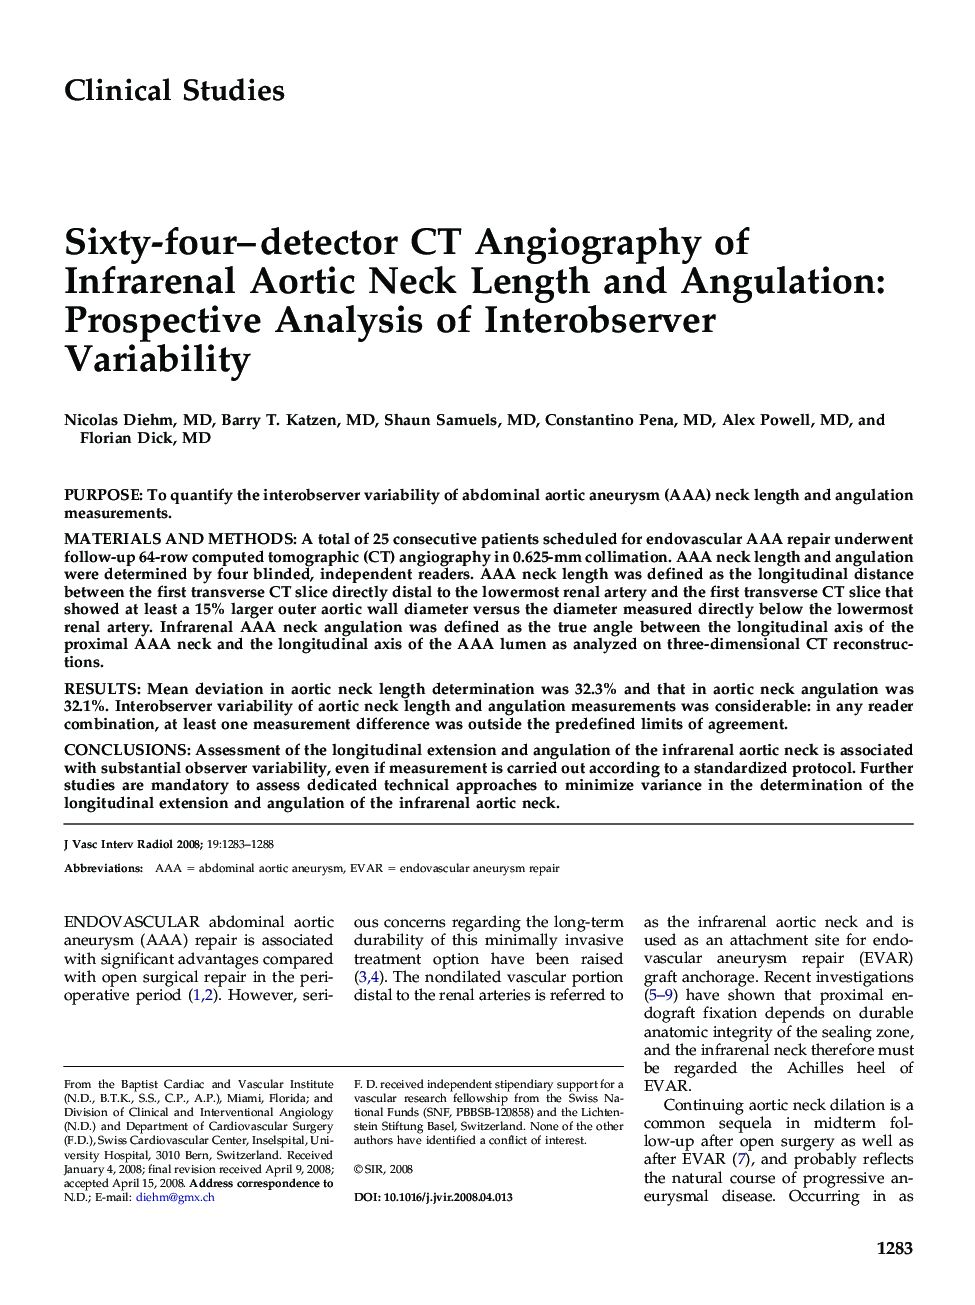 Sixty-four-detector CT Angiography of Infrarenal Aortic Neck Length and Angulation: Prospective Analysis of Interobserver Variability